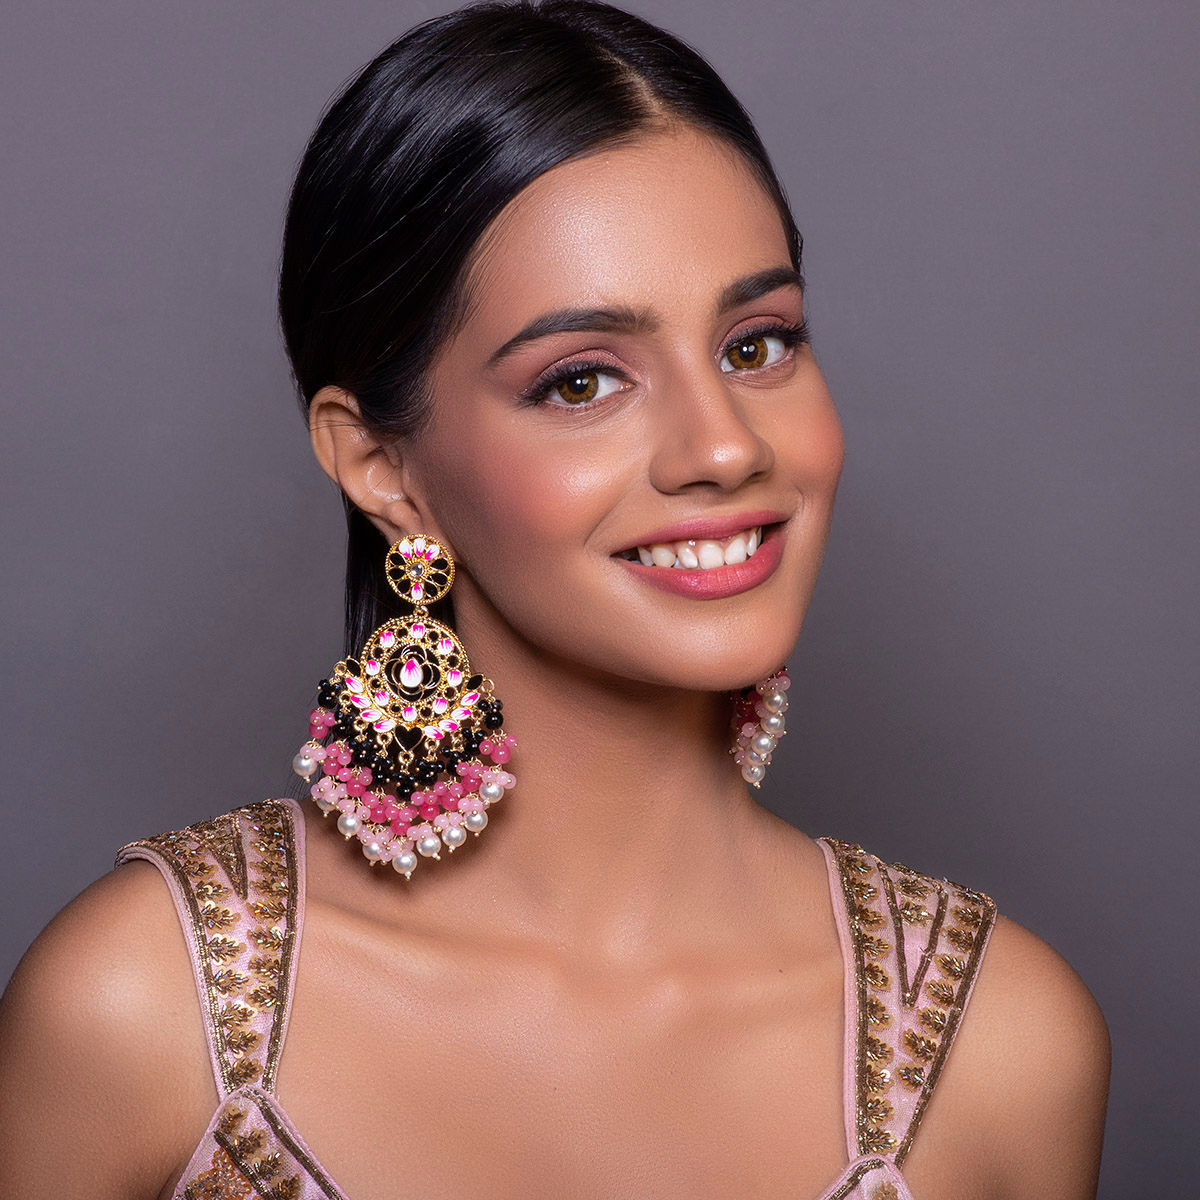 Buy Now Chandbali Earrings From Our Collection | Niscka